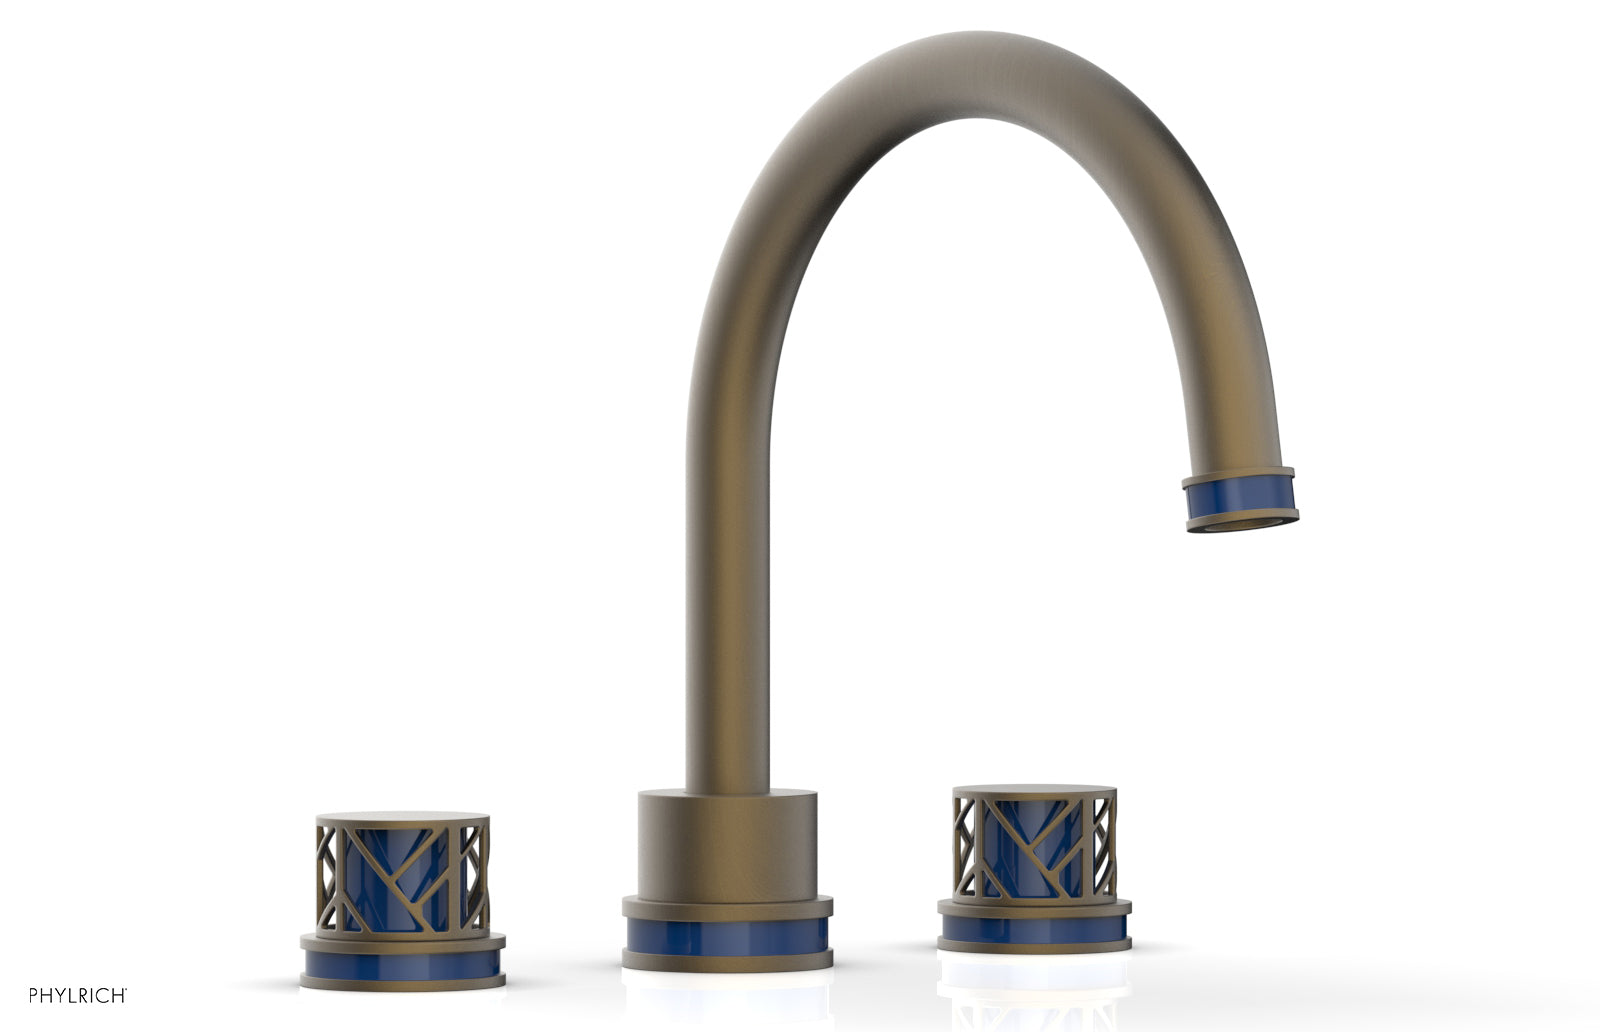 Phylrich JOLIE Deck Tub Set - Round Handles with "Navy Blue" Accents